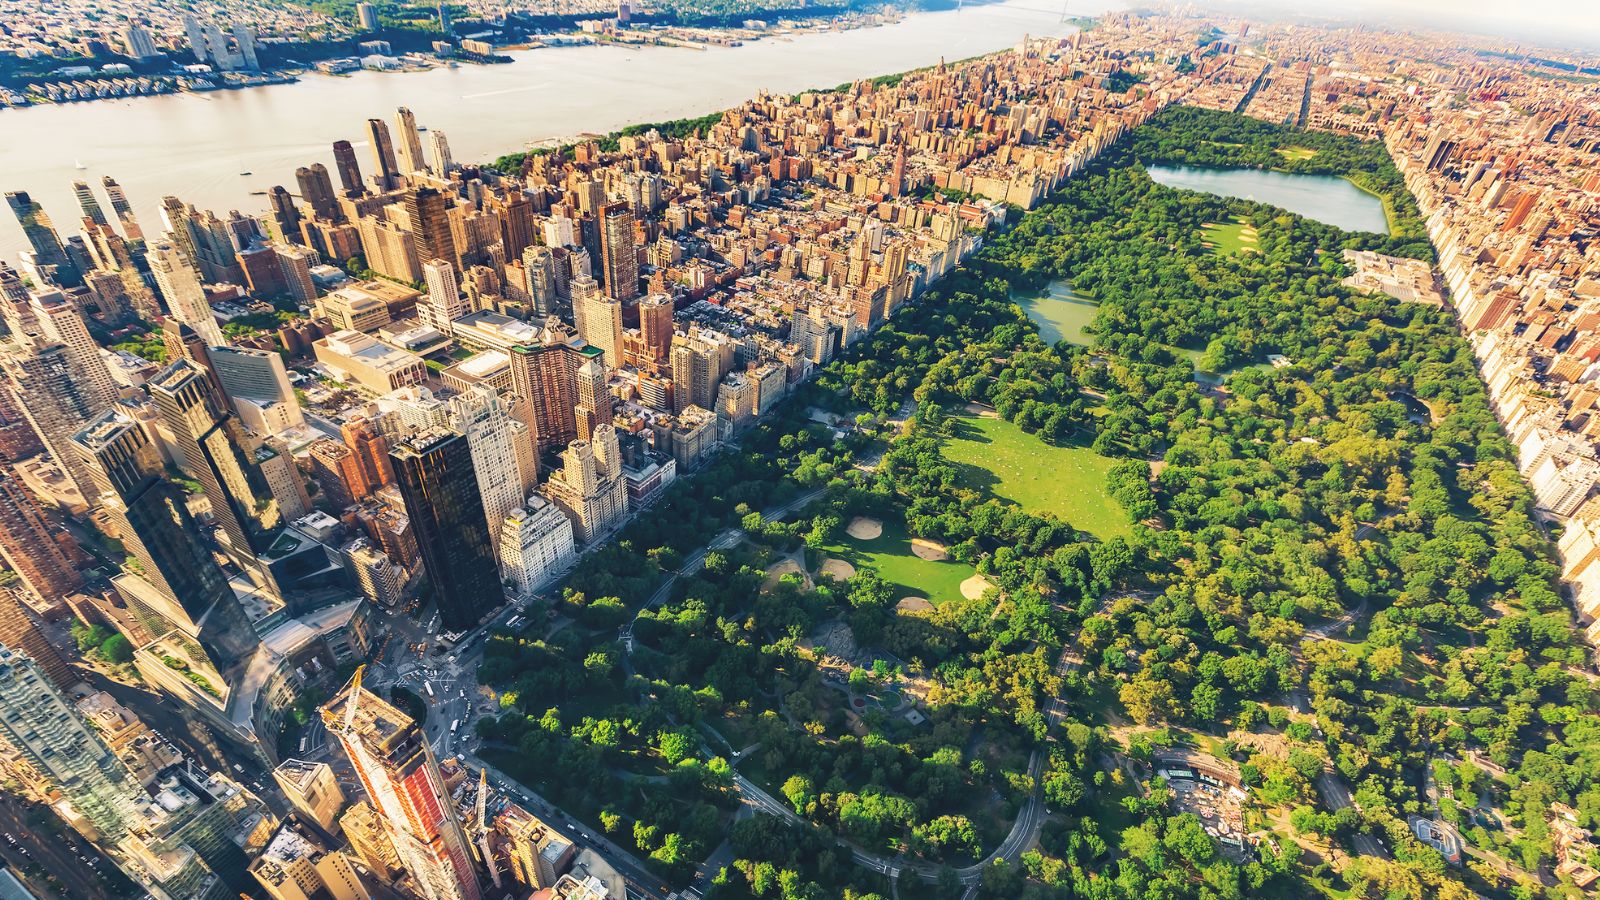 Aerial view of Manhattan and Central Park in New York City (Photo: Shutterstock)